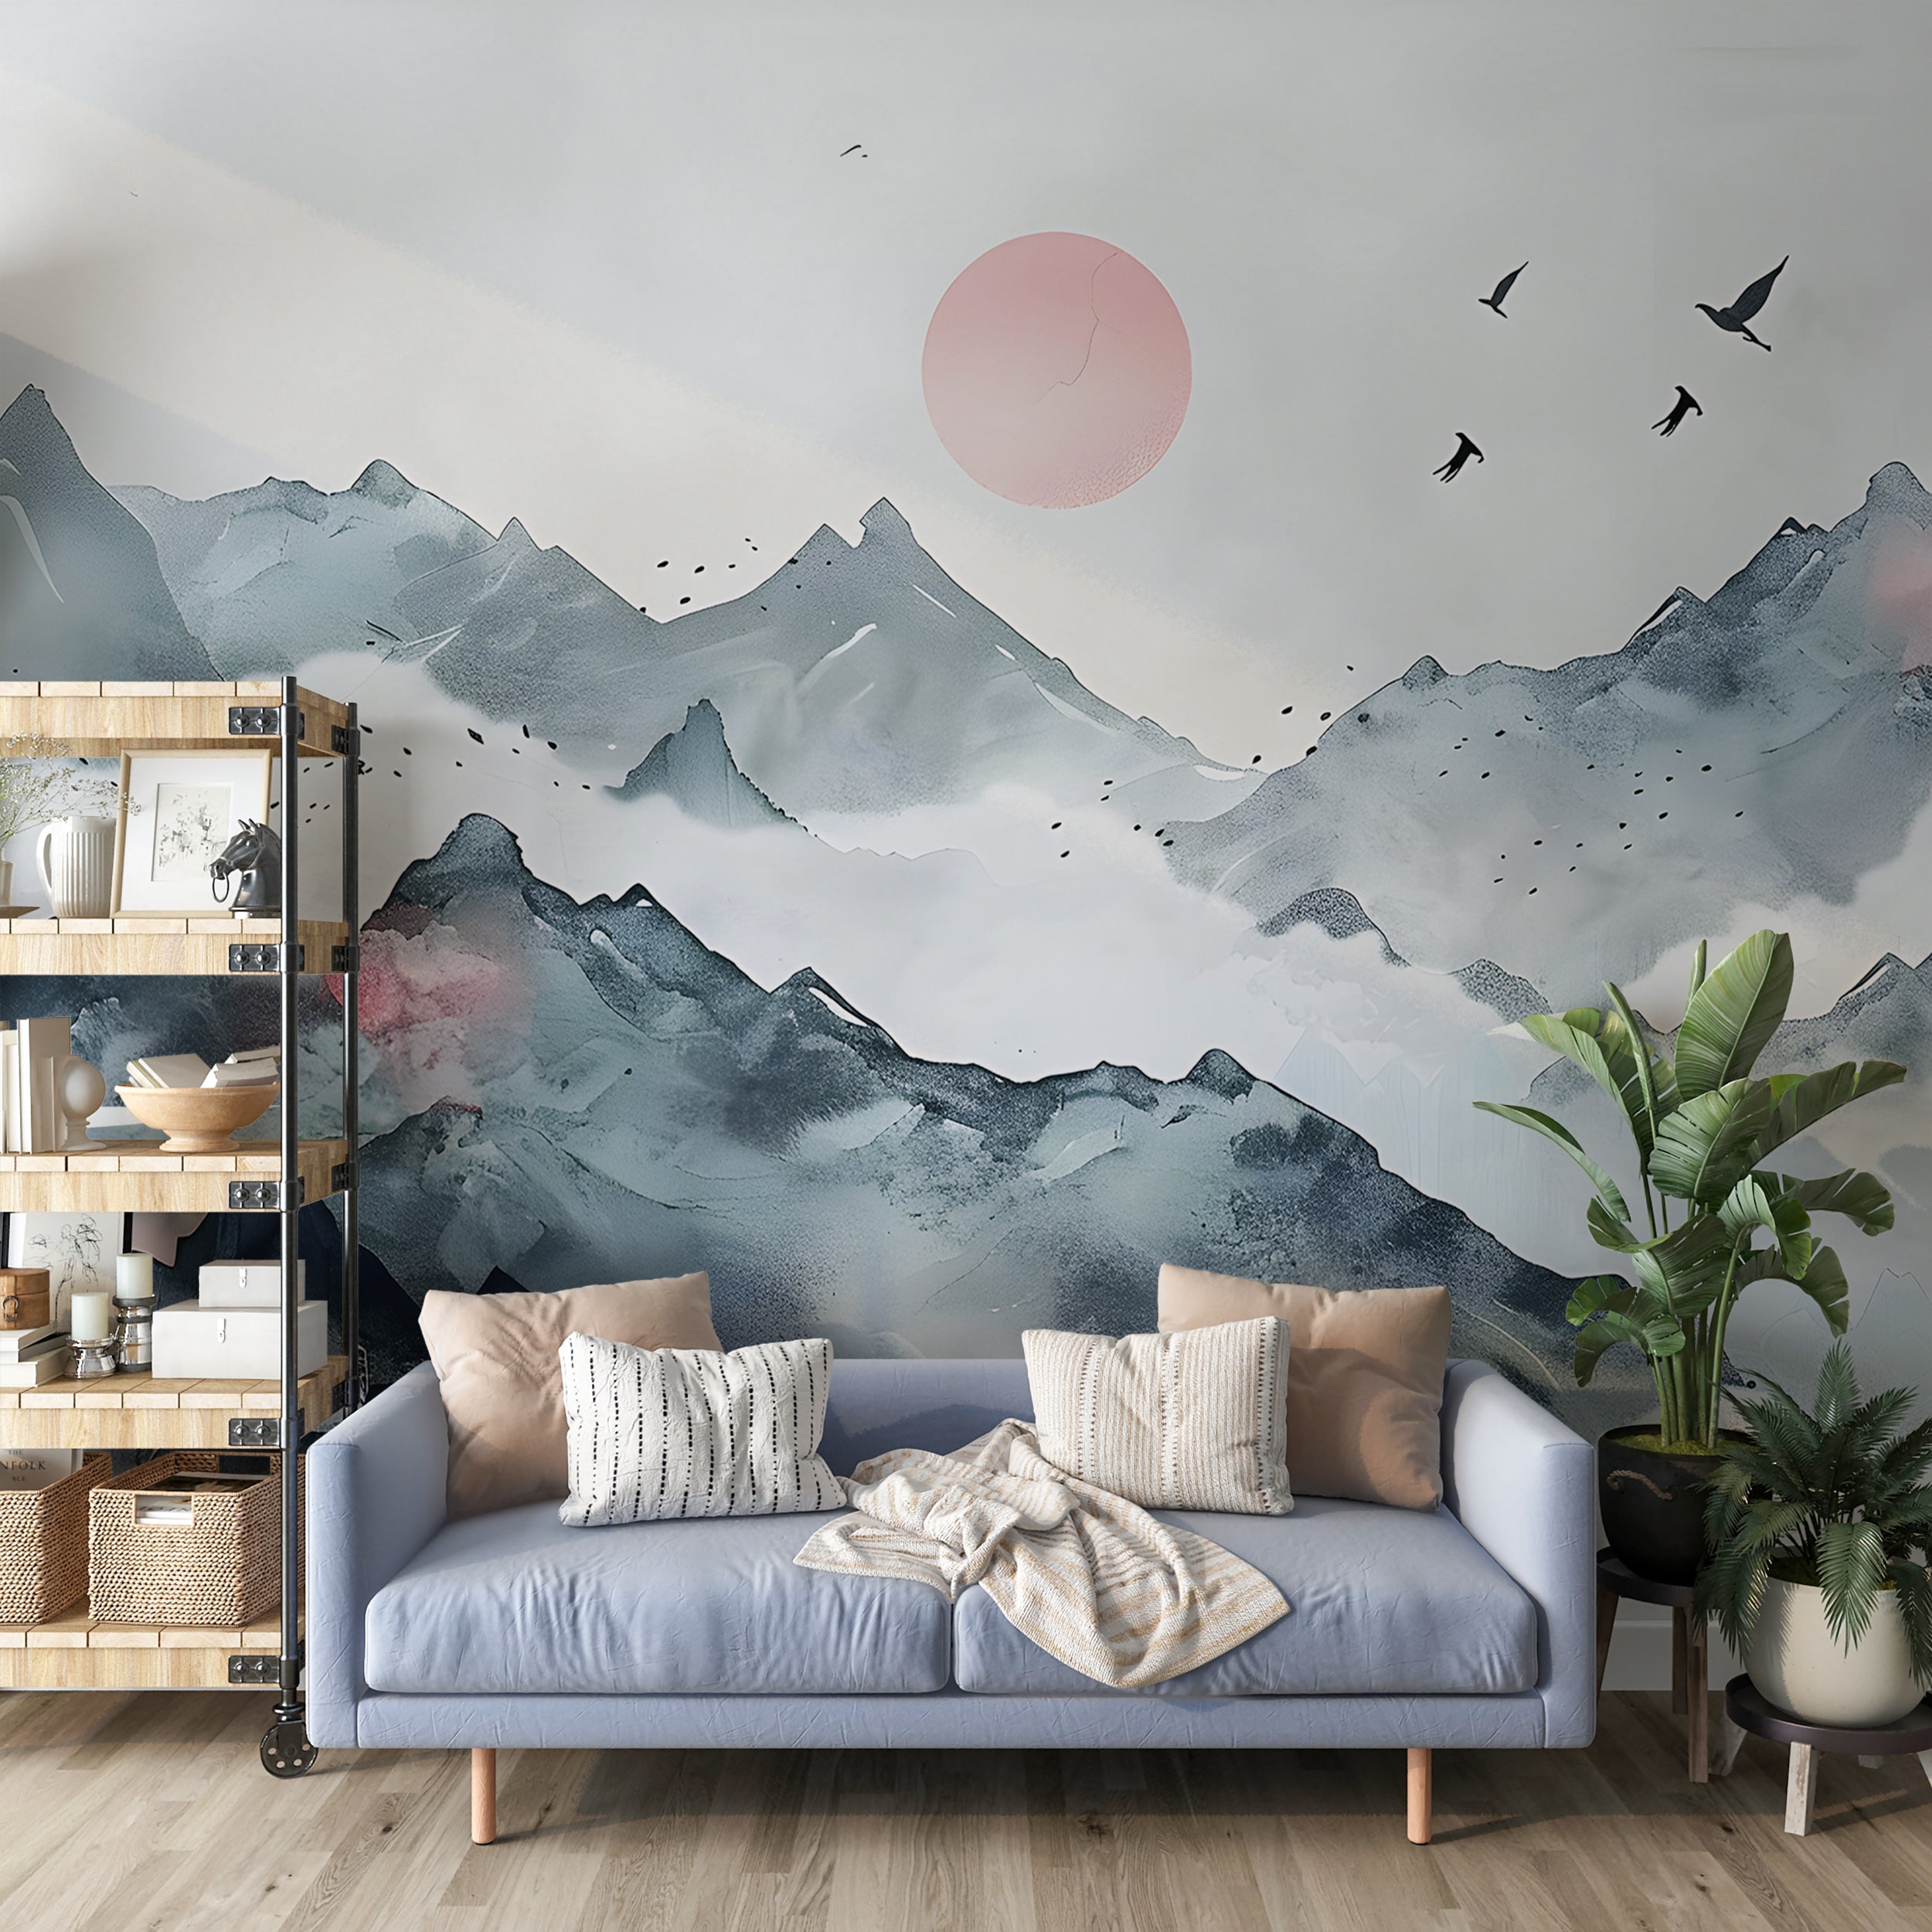 Abstract Mountains Sunset Mural, Watercolor Japanese Landscape Wallpaper, Peel and Stick Removable Green Foggy Mountain Wall Decal